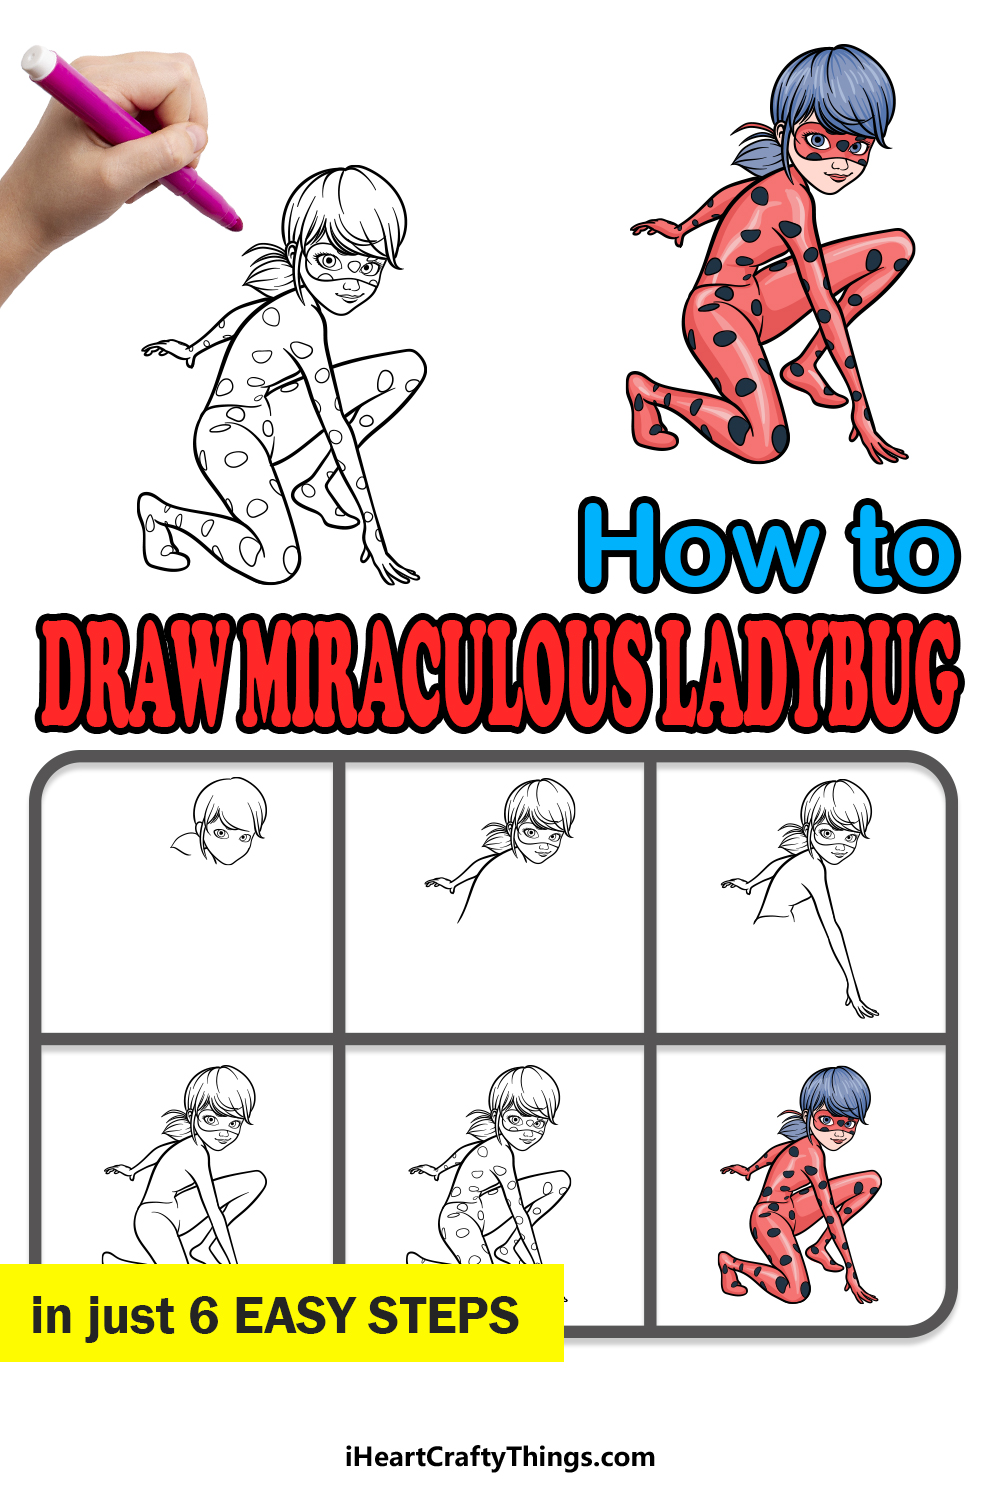 how to draw Miraculous Ladybug in 6 easy steps